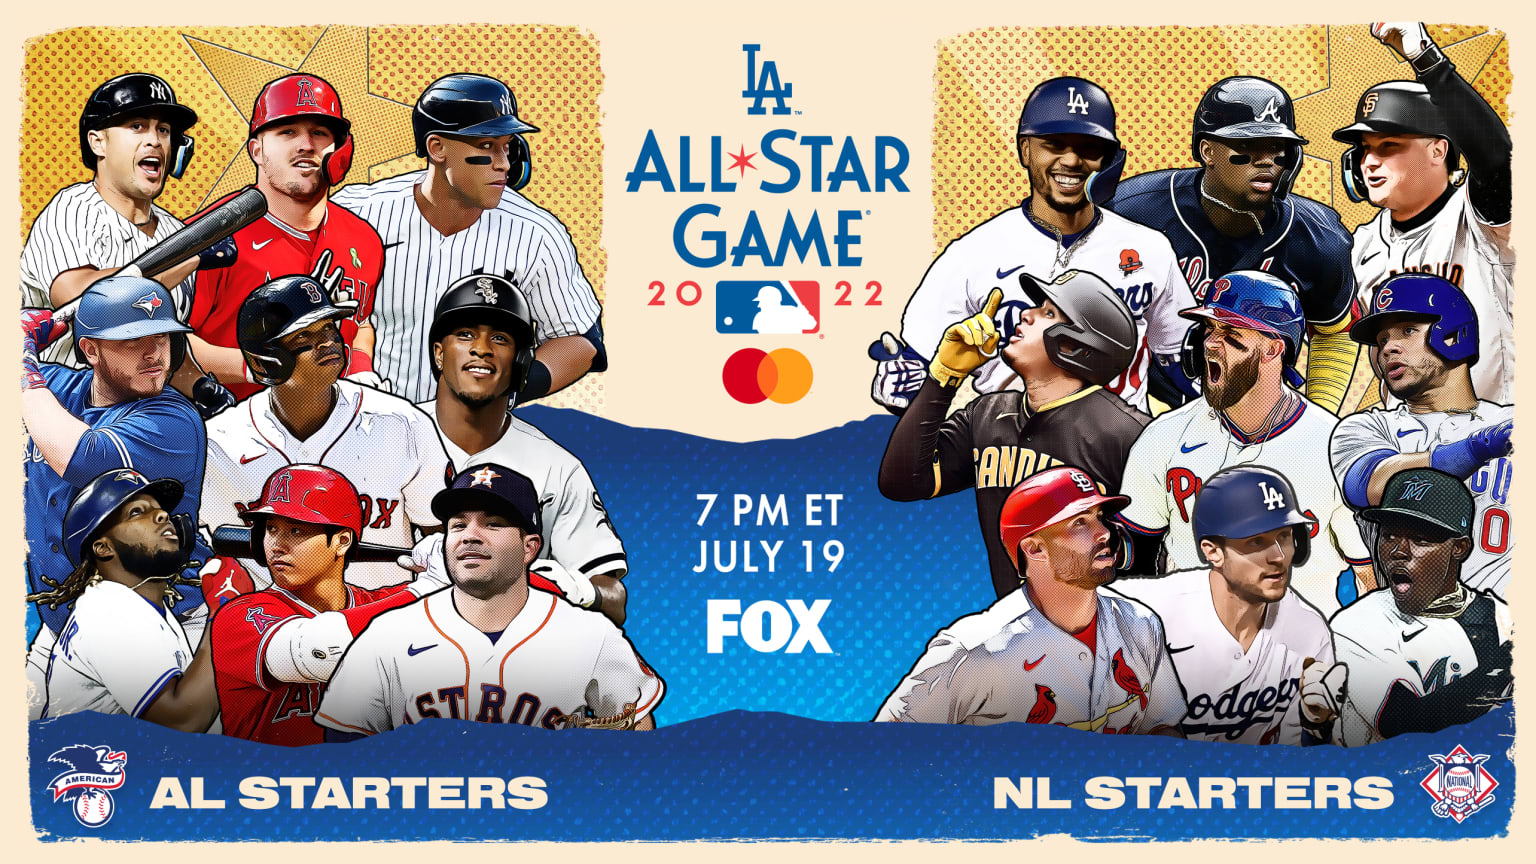 Complete Mlb All Star Roosters Revealed Bleachers News SexiezPicz Web